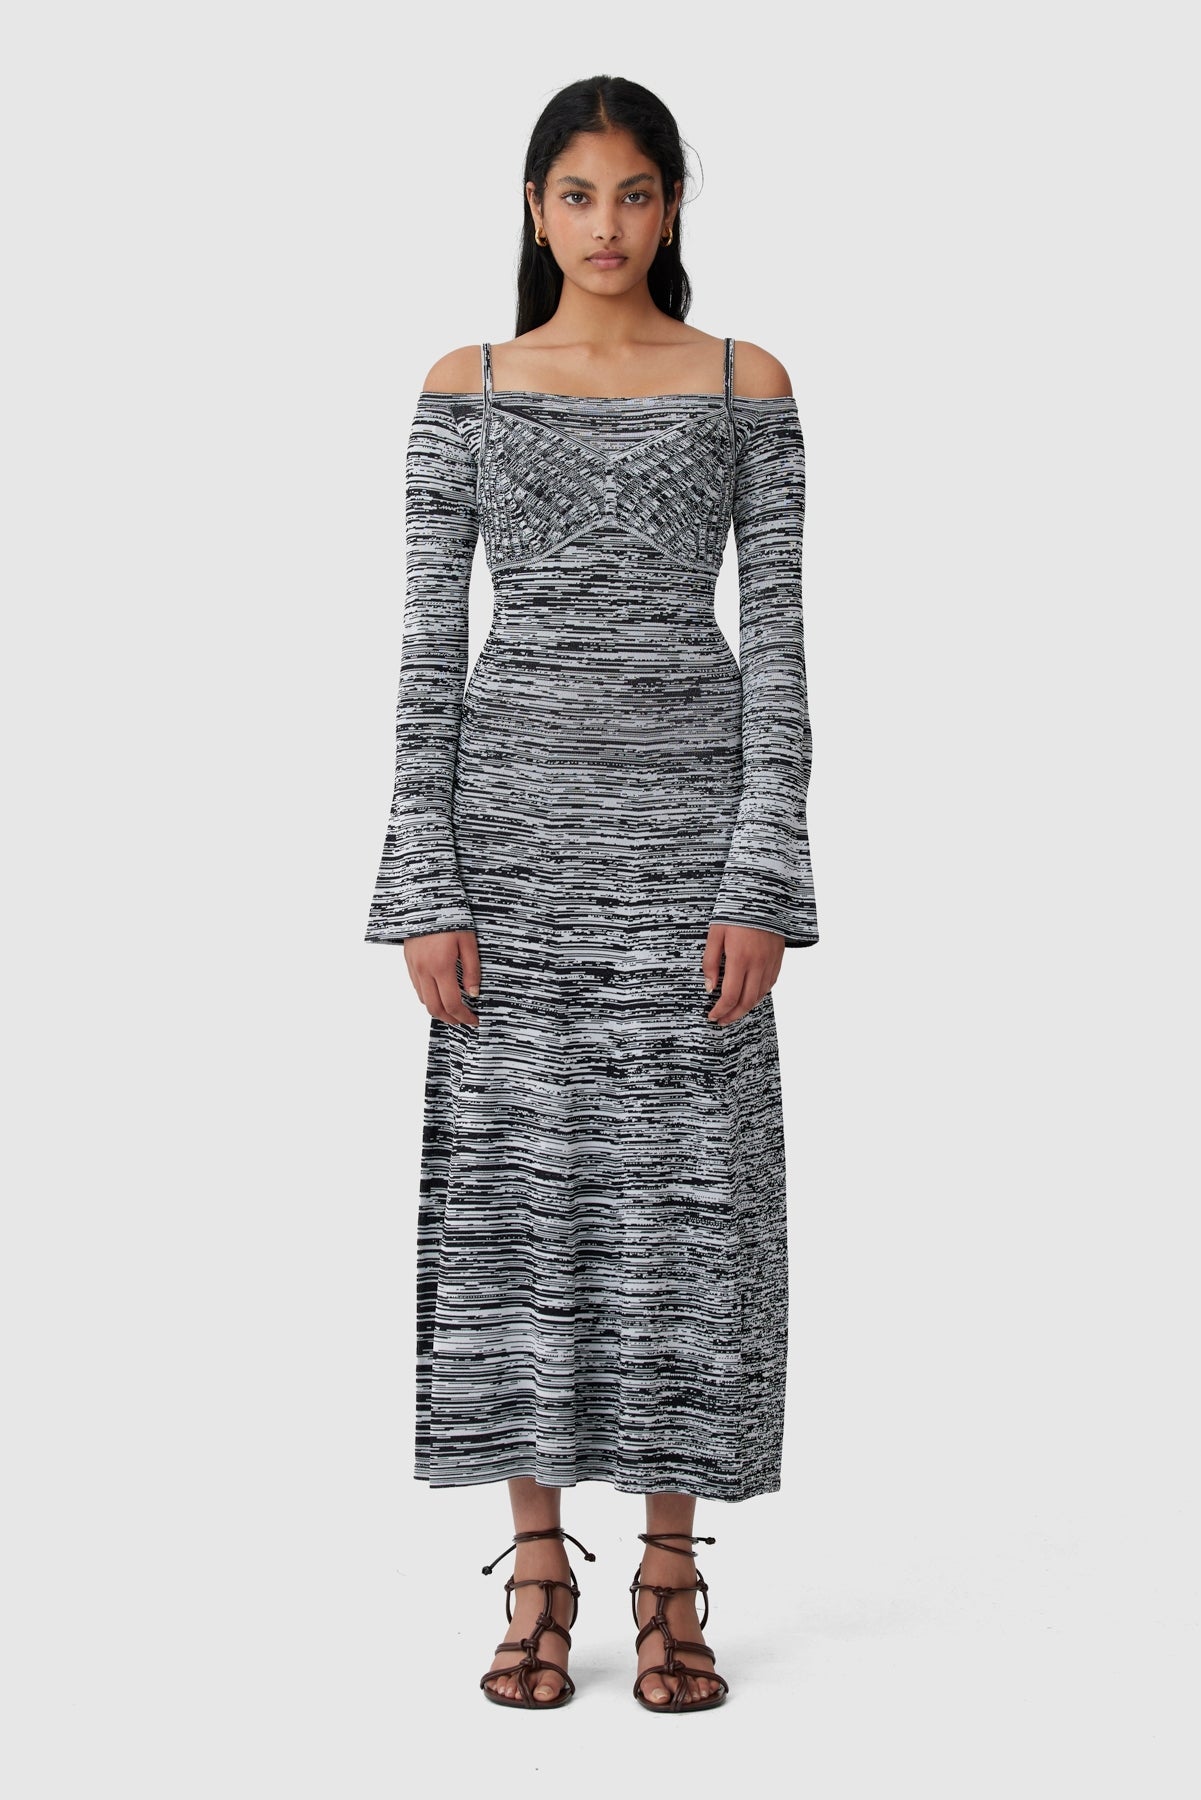 C/MEO Collective - Take Care Dress - Black Marle